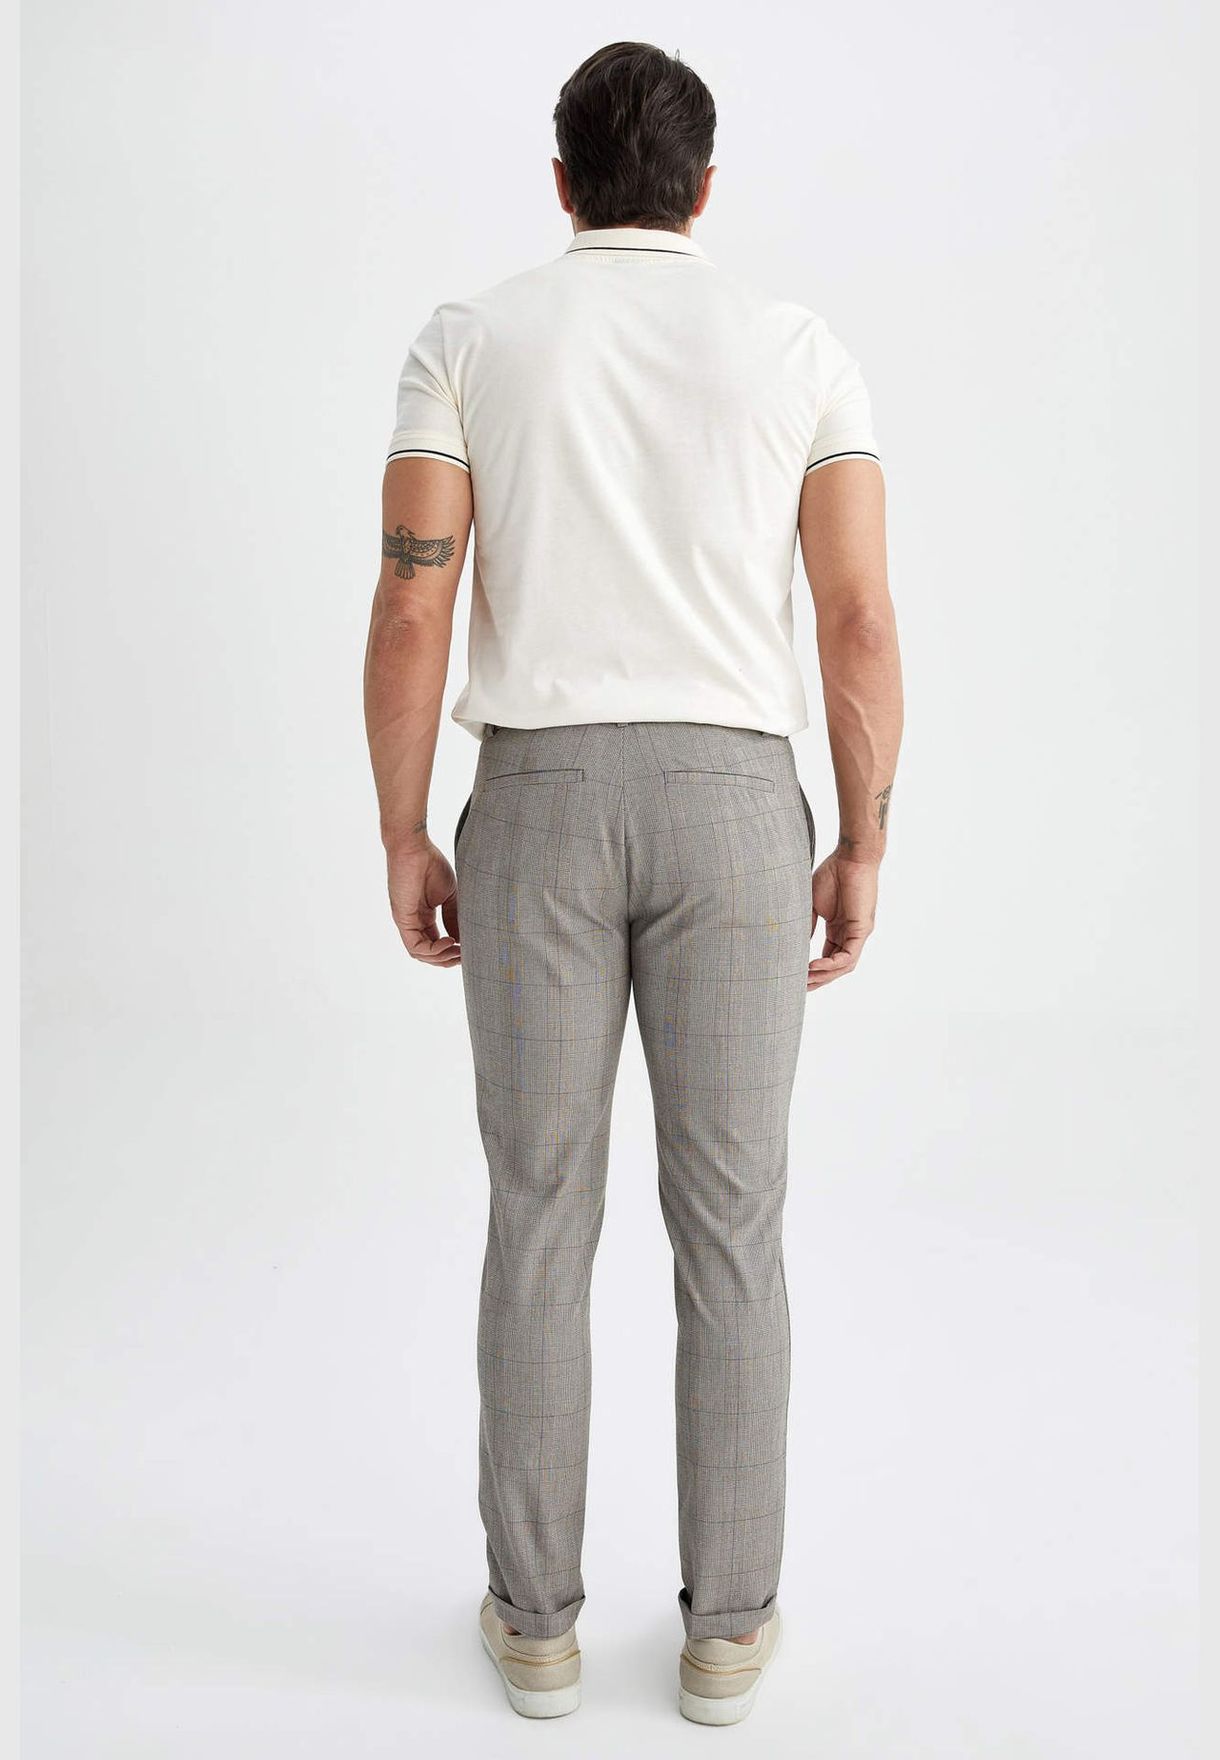 Man Jogger Fit Woven Trousers